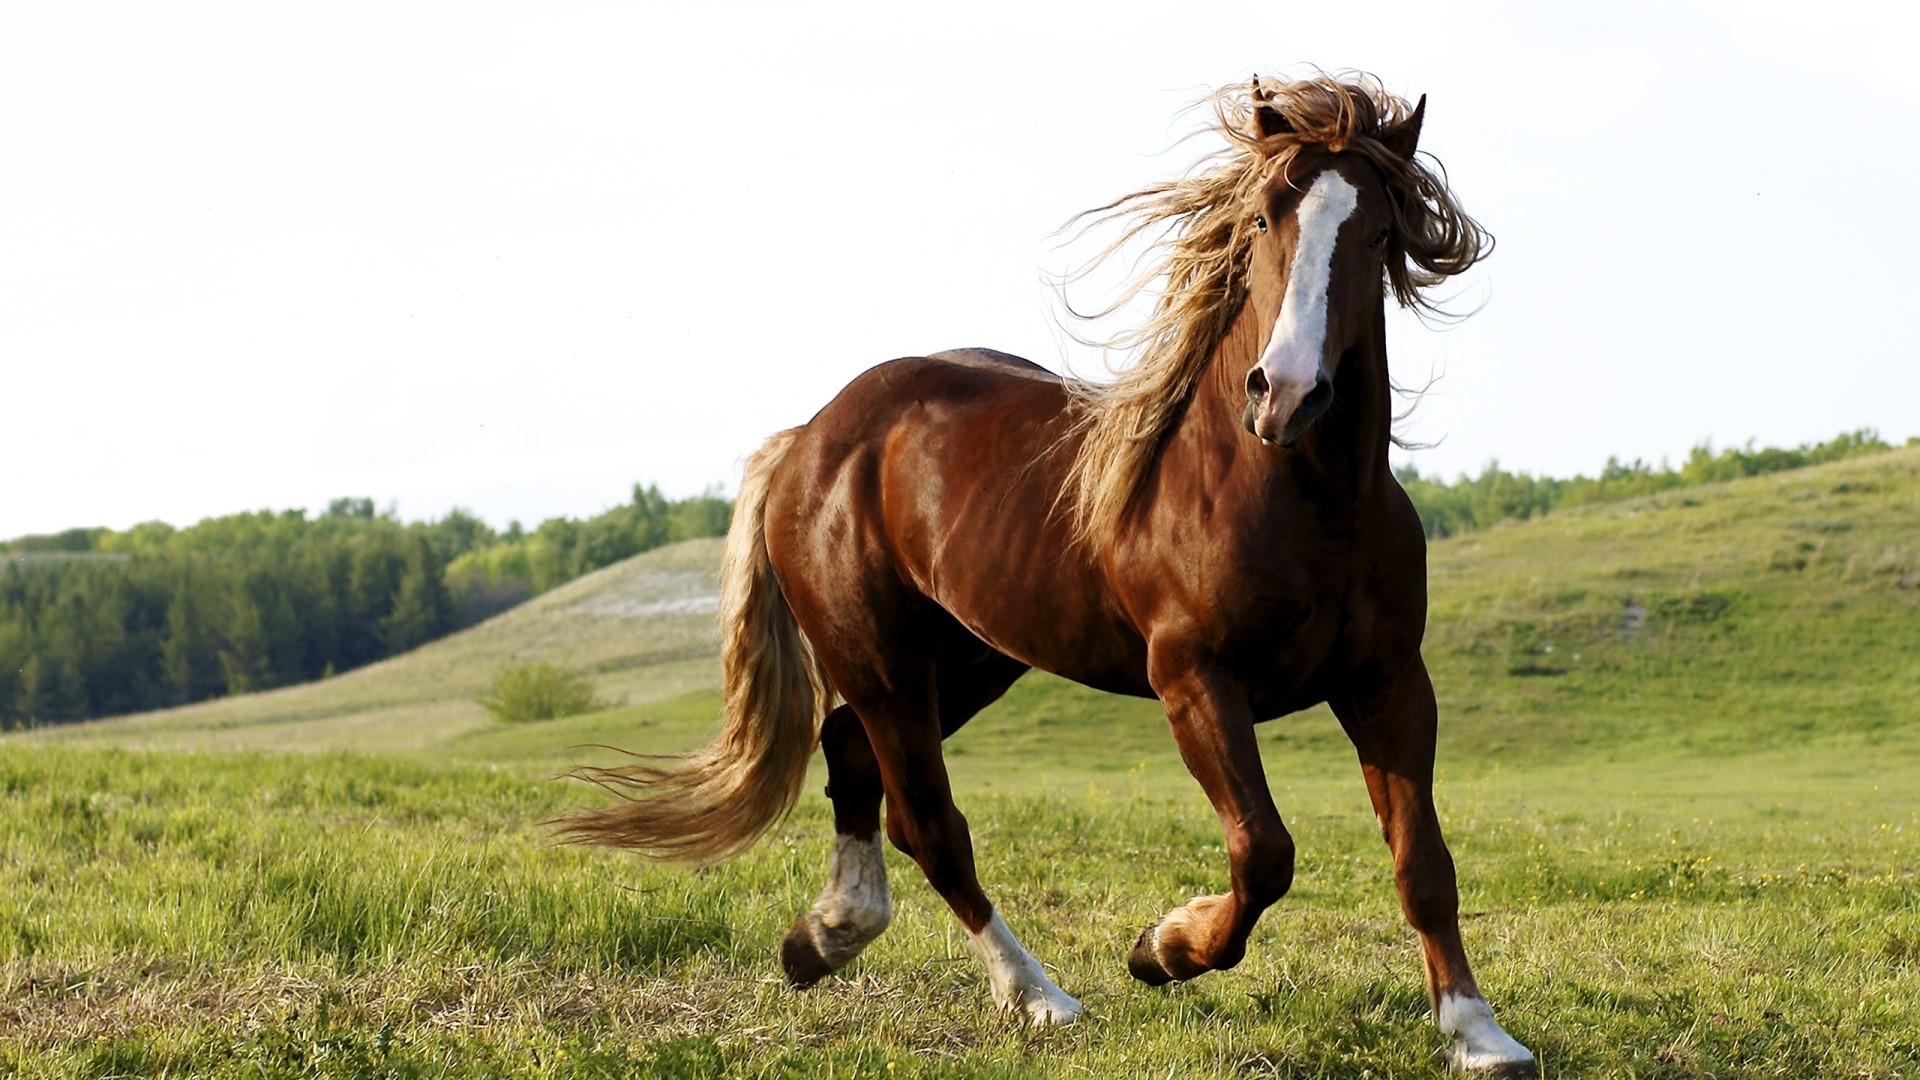 1920x1080 Horse Wallpapers Horse Images for Free MTX Horse Wallpapers 1920Ã1080